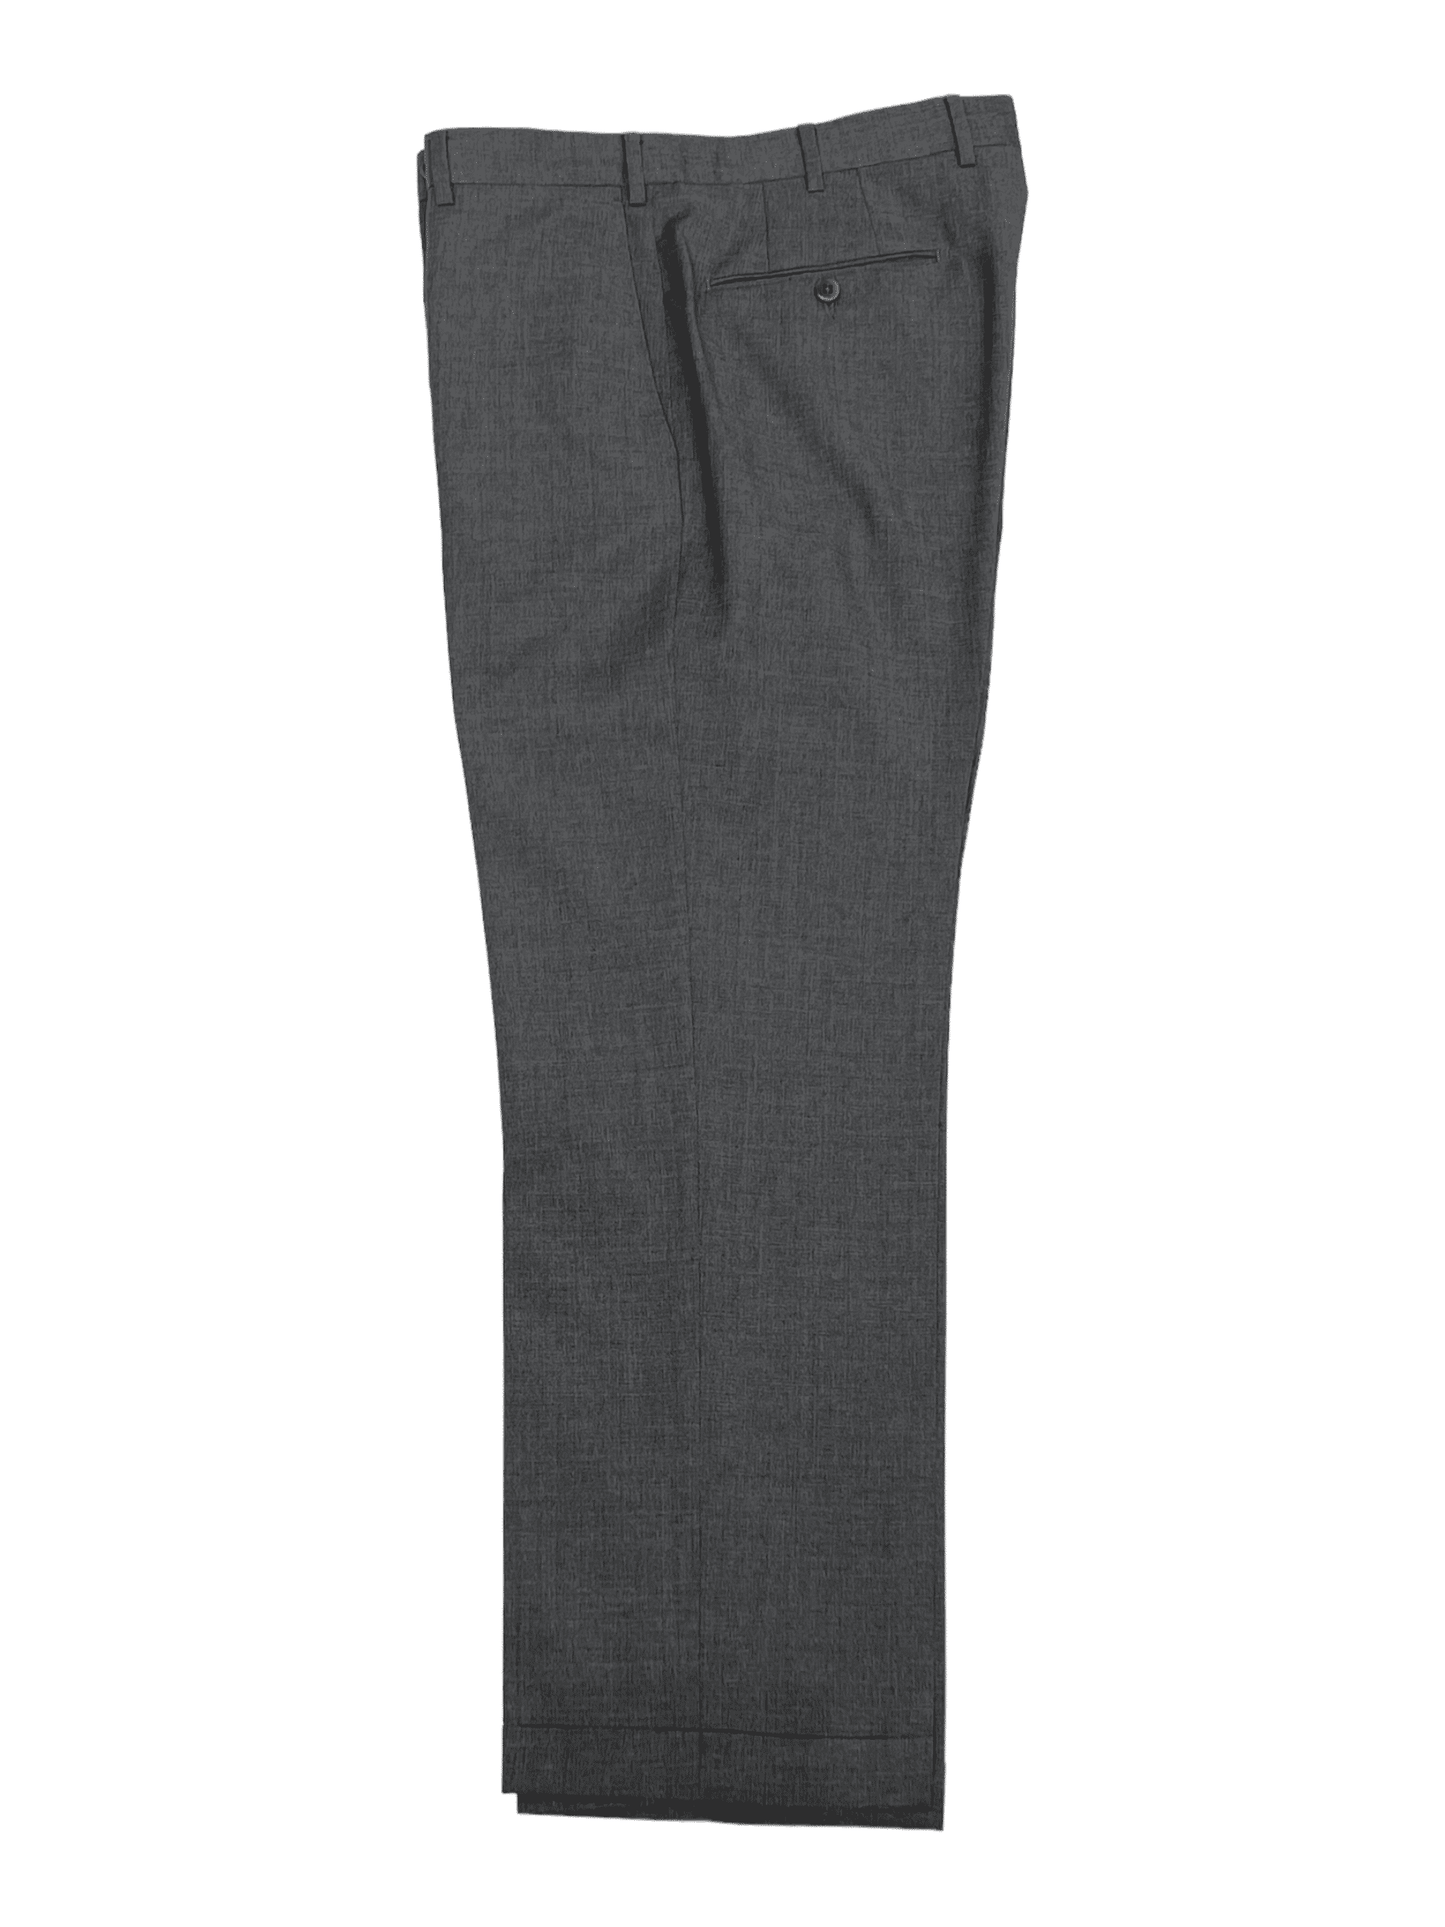 Ermenegildo Zegna Grey Wool Dress Pant 32W 29W— Genuine Design Luxury Consignment Calgary, Alberta, Canada New and Pre-Owned Clothing, Shoes, Accessories.